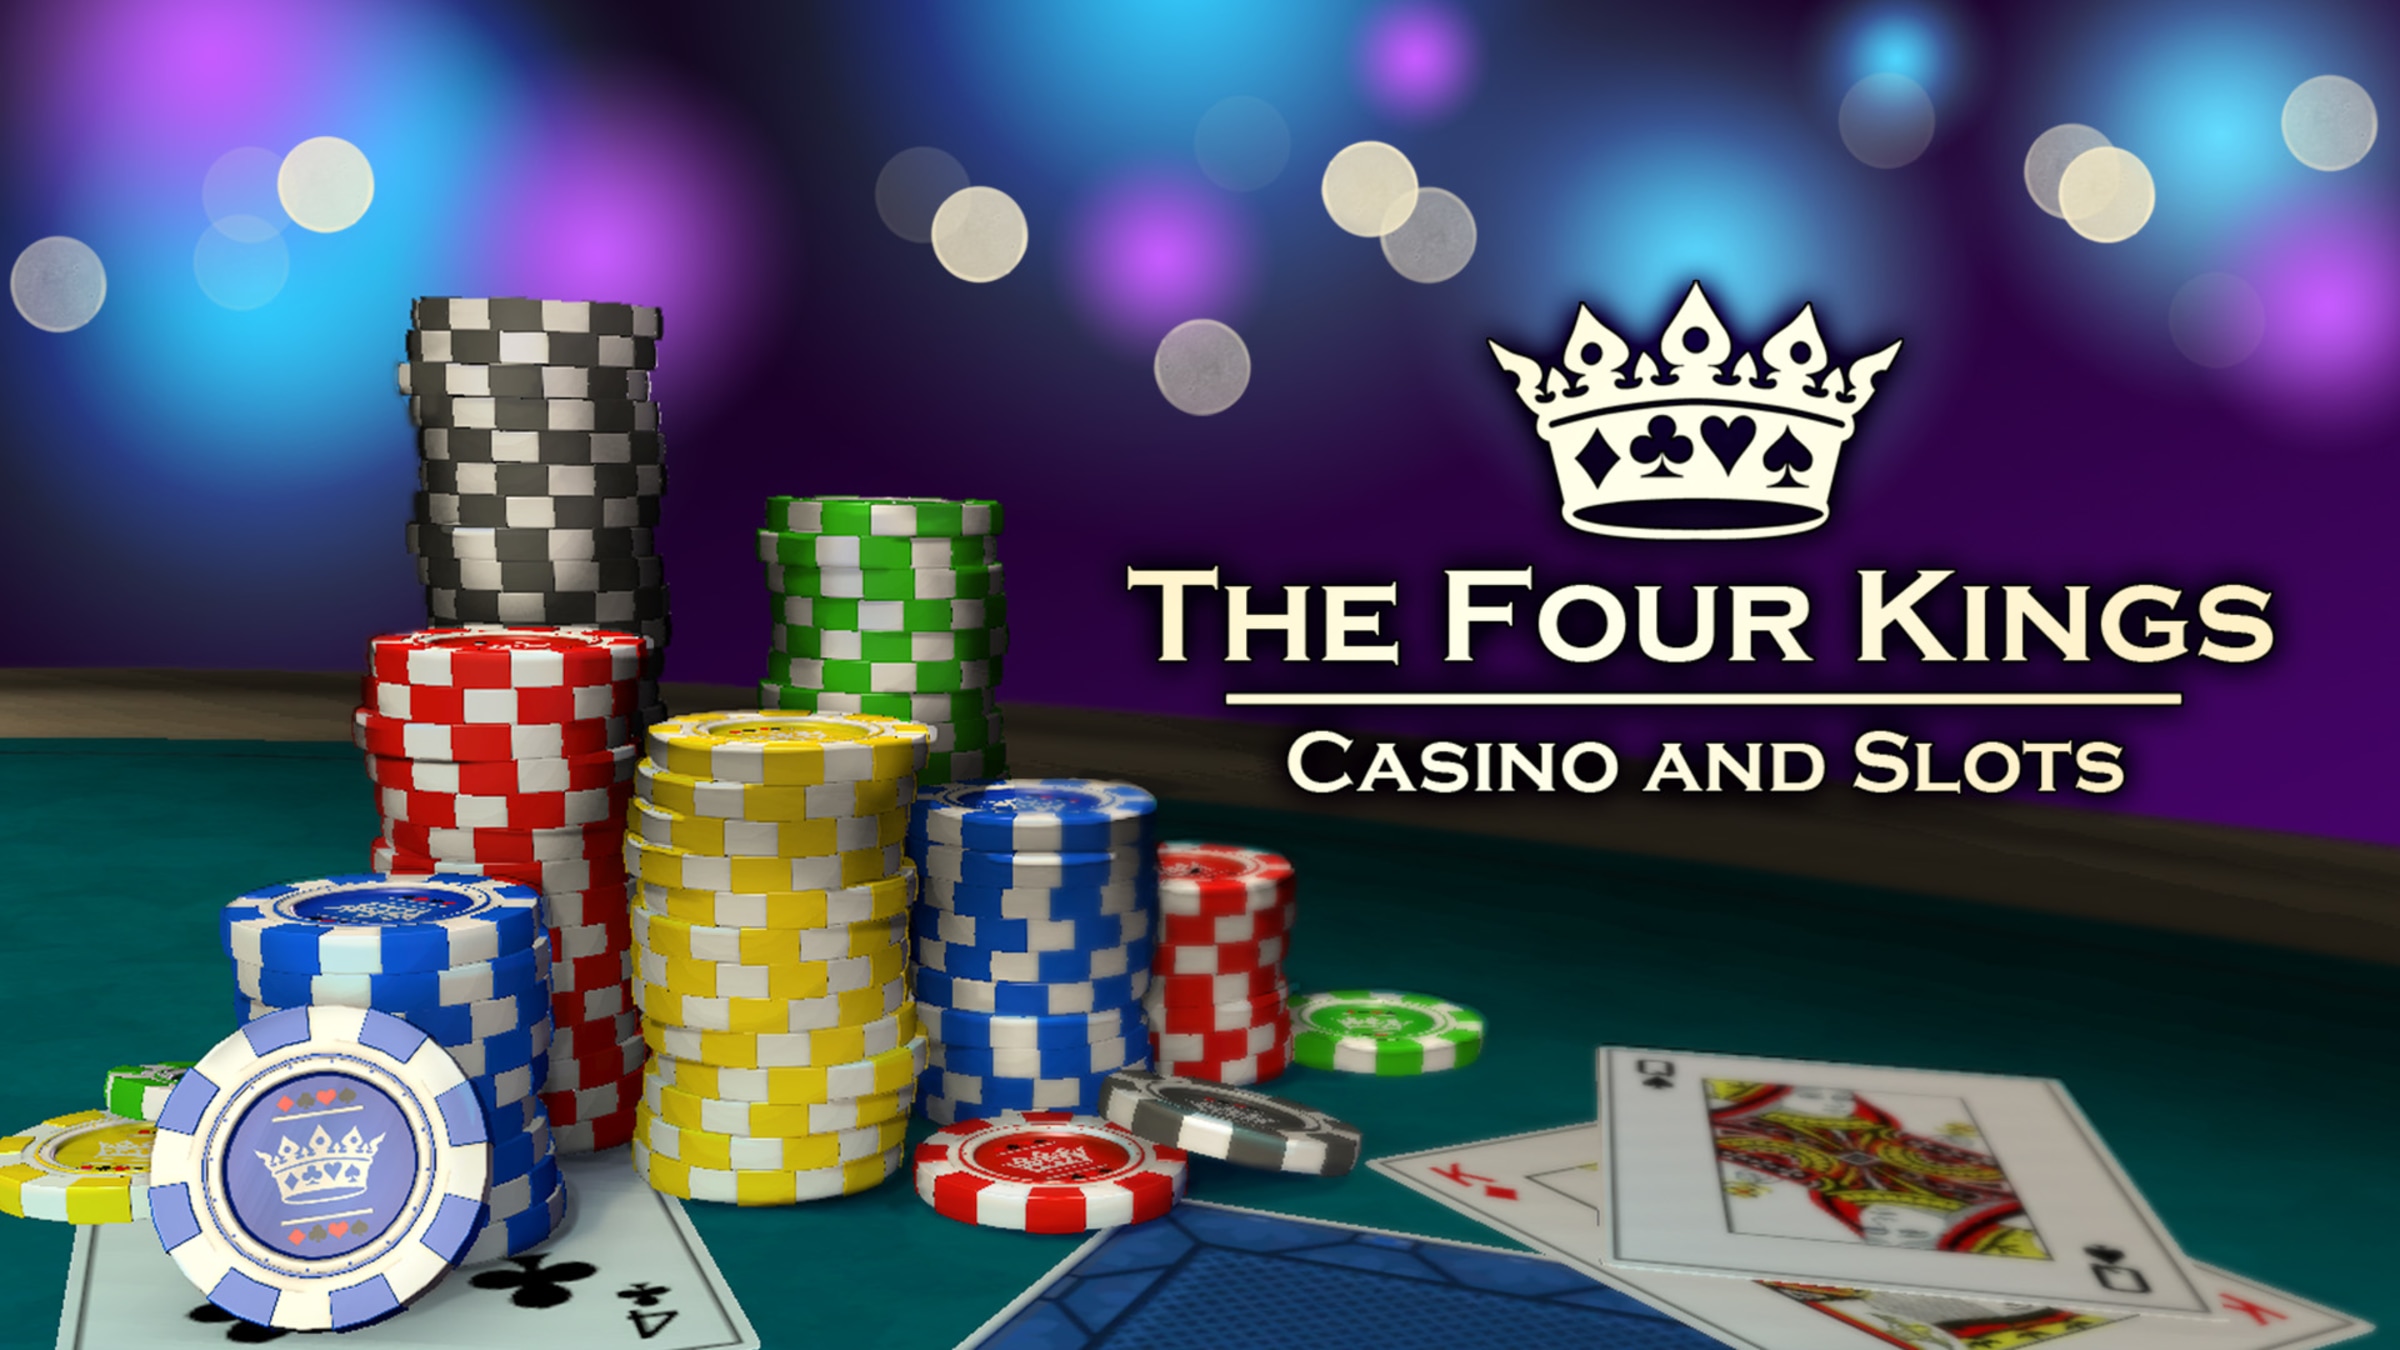 The Four Kings Casino and Slots for Nintendo Switch - Nintendo Official Site